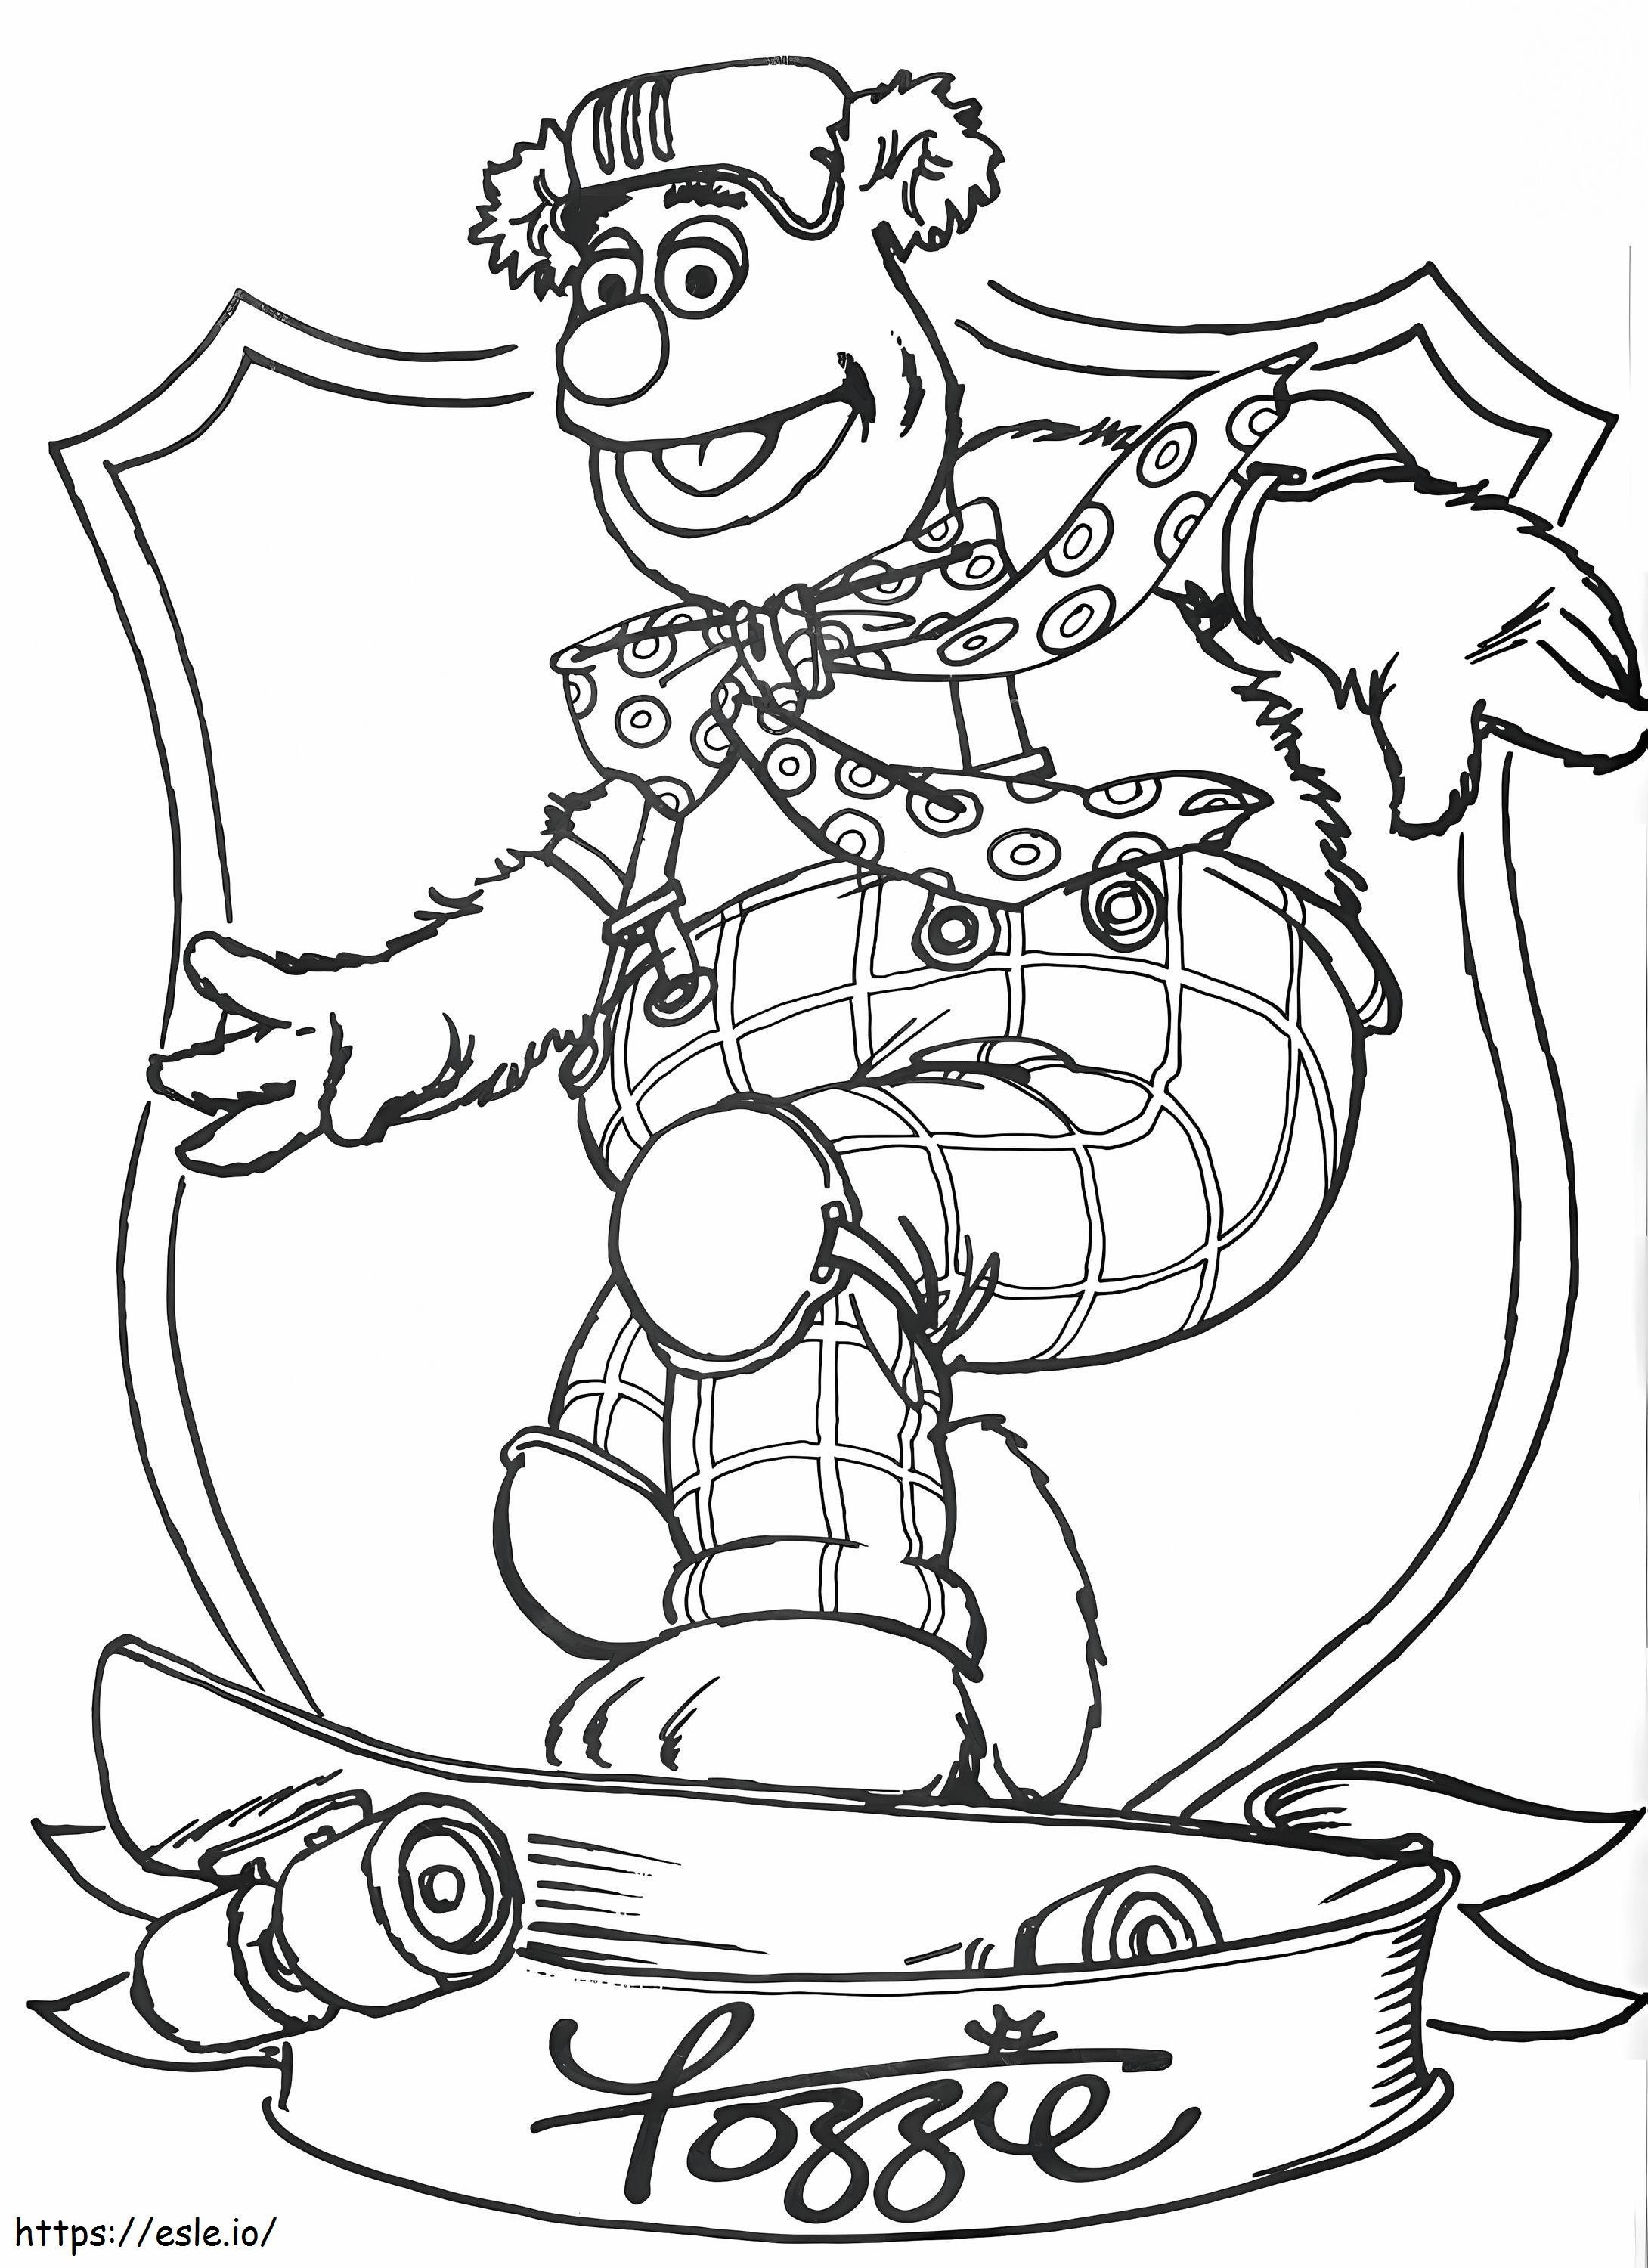 Fozzie Bear coloring page